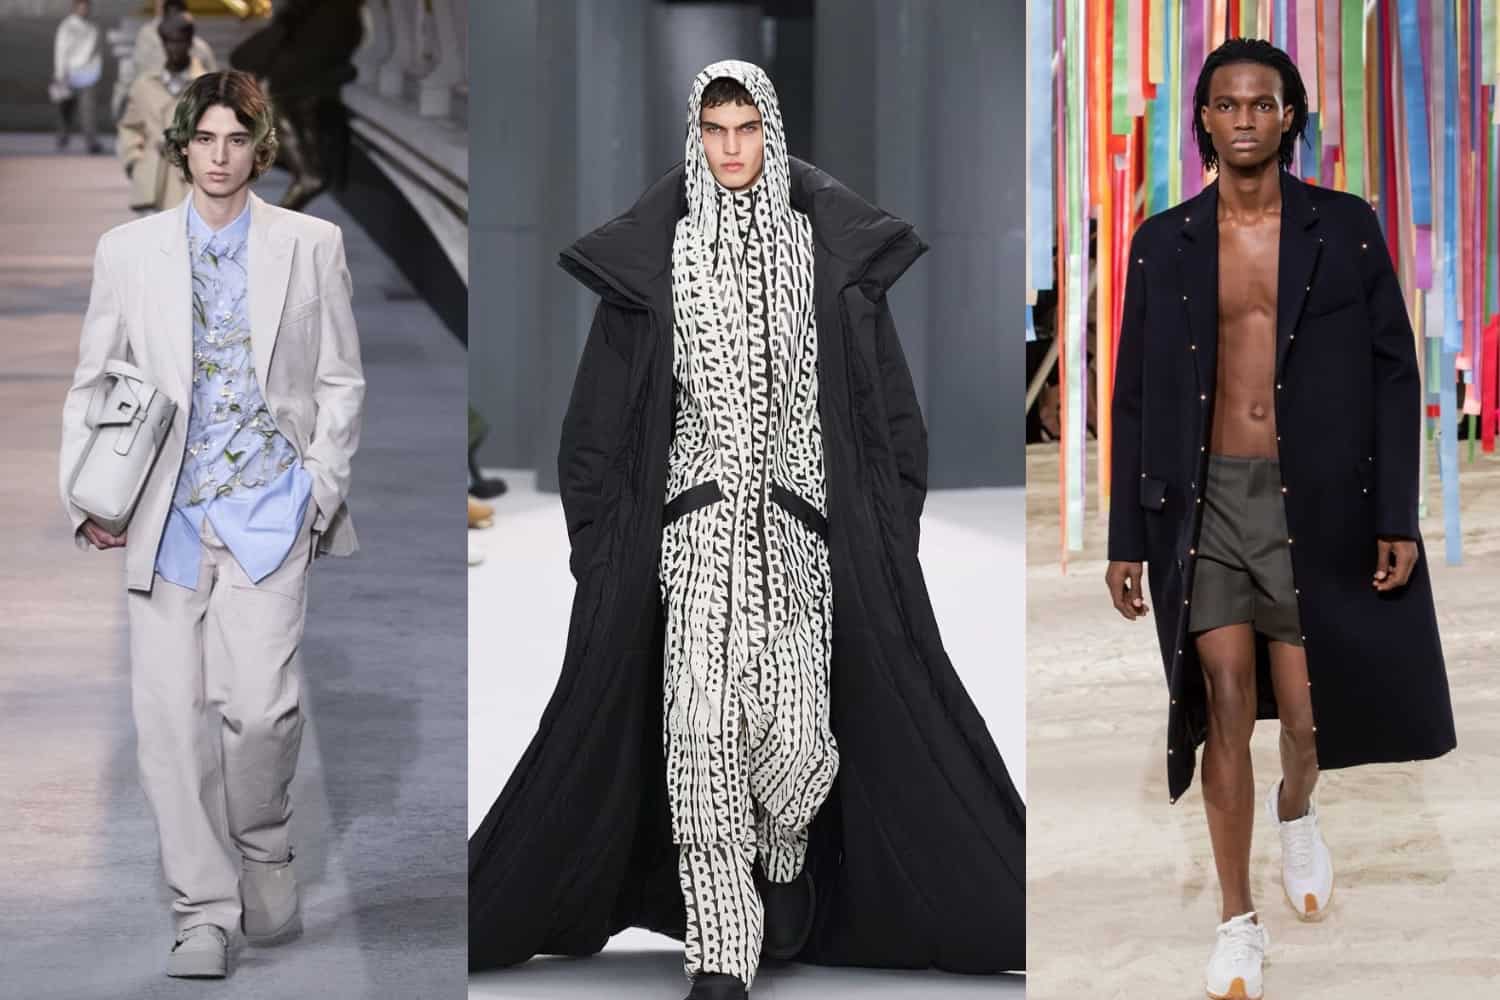 Sofia Achaval's Paris Fashion Week Men's Diary: Dior, Loewe, Rick Owens,  And More! - Daily Front Row